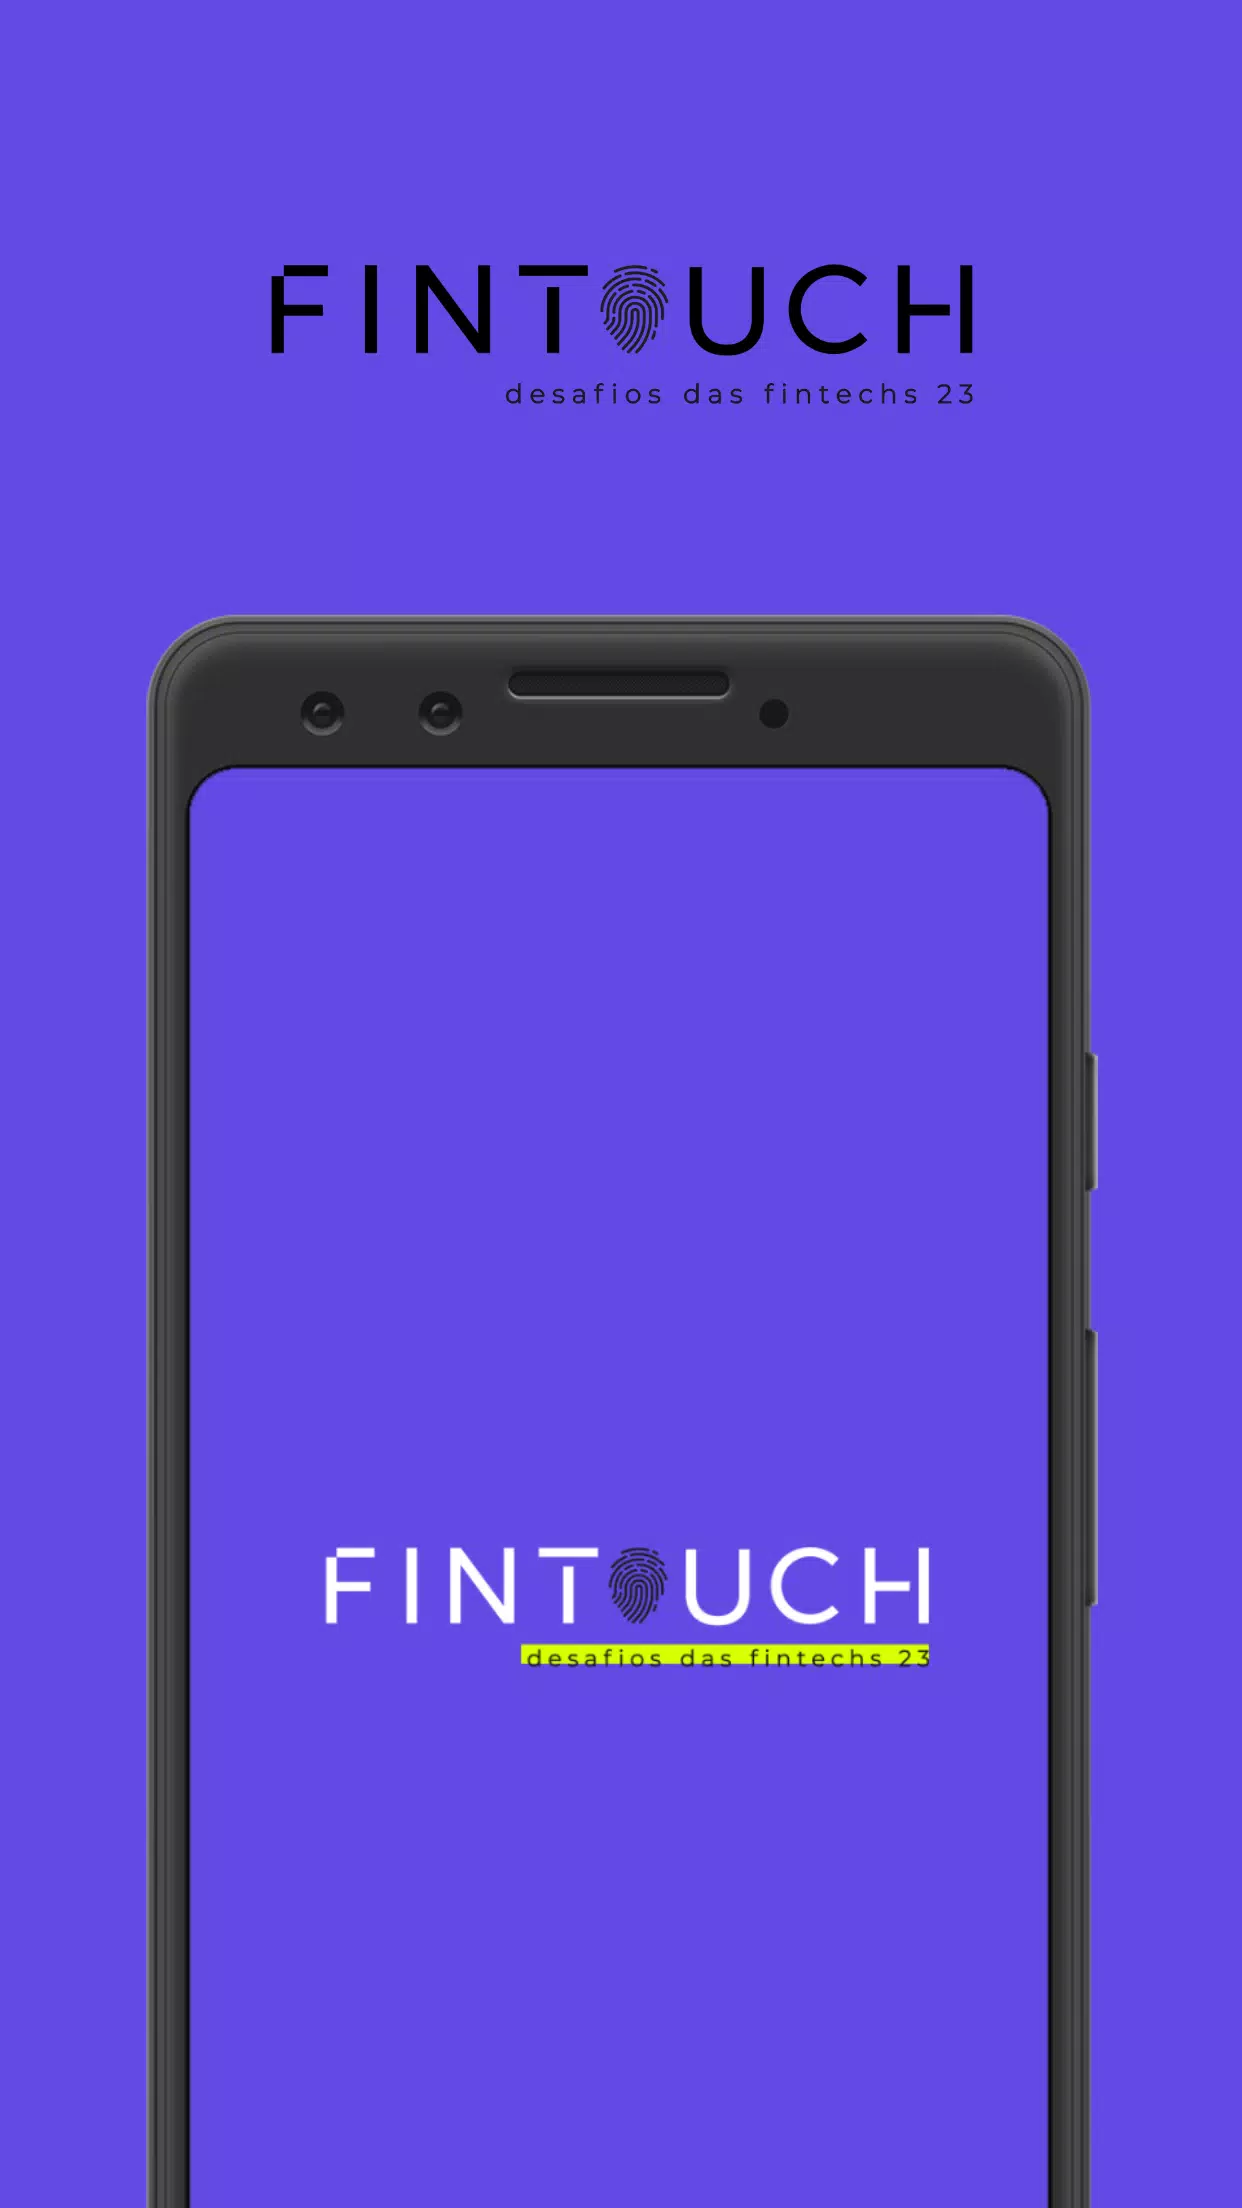 Fintouch Tecnologia Web - Apps e jogos Android